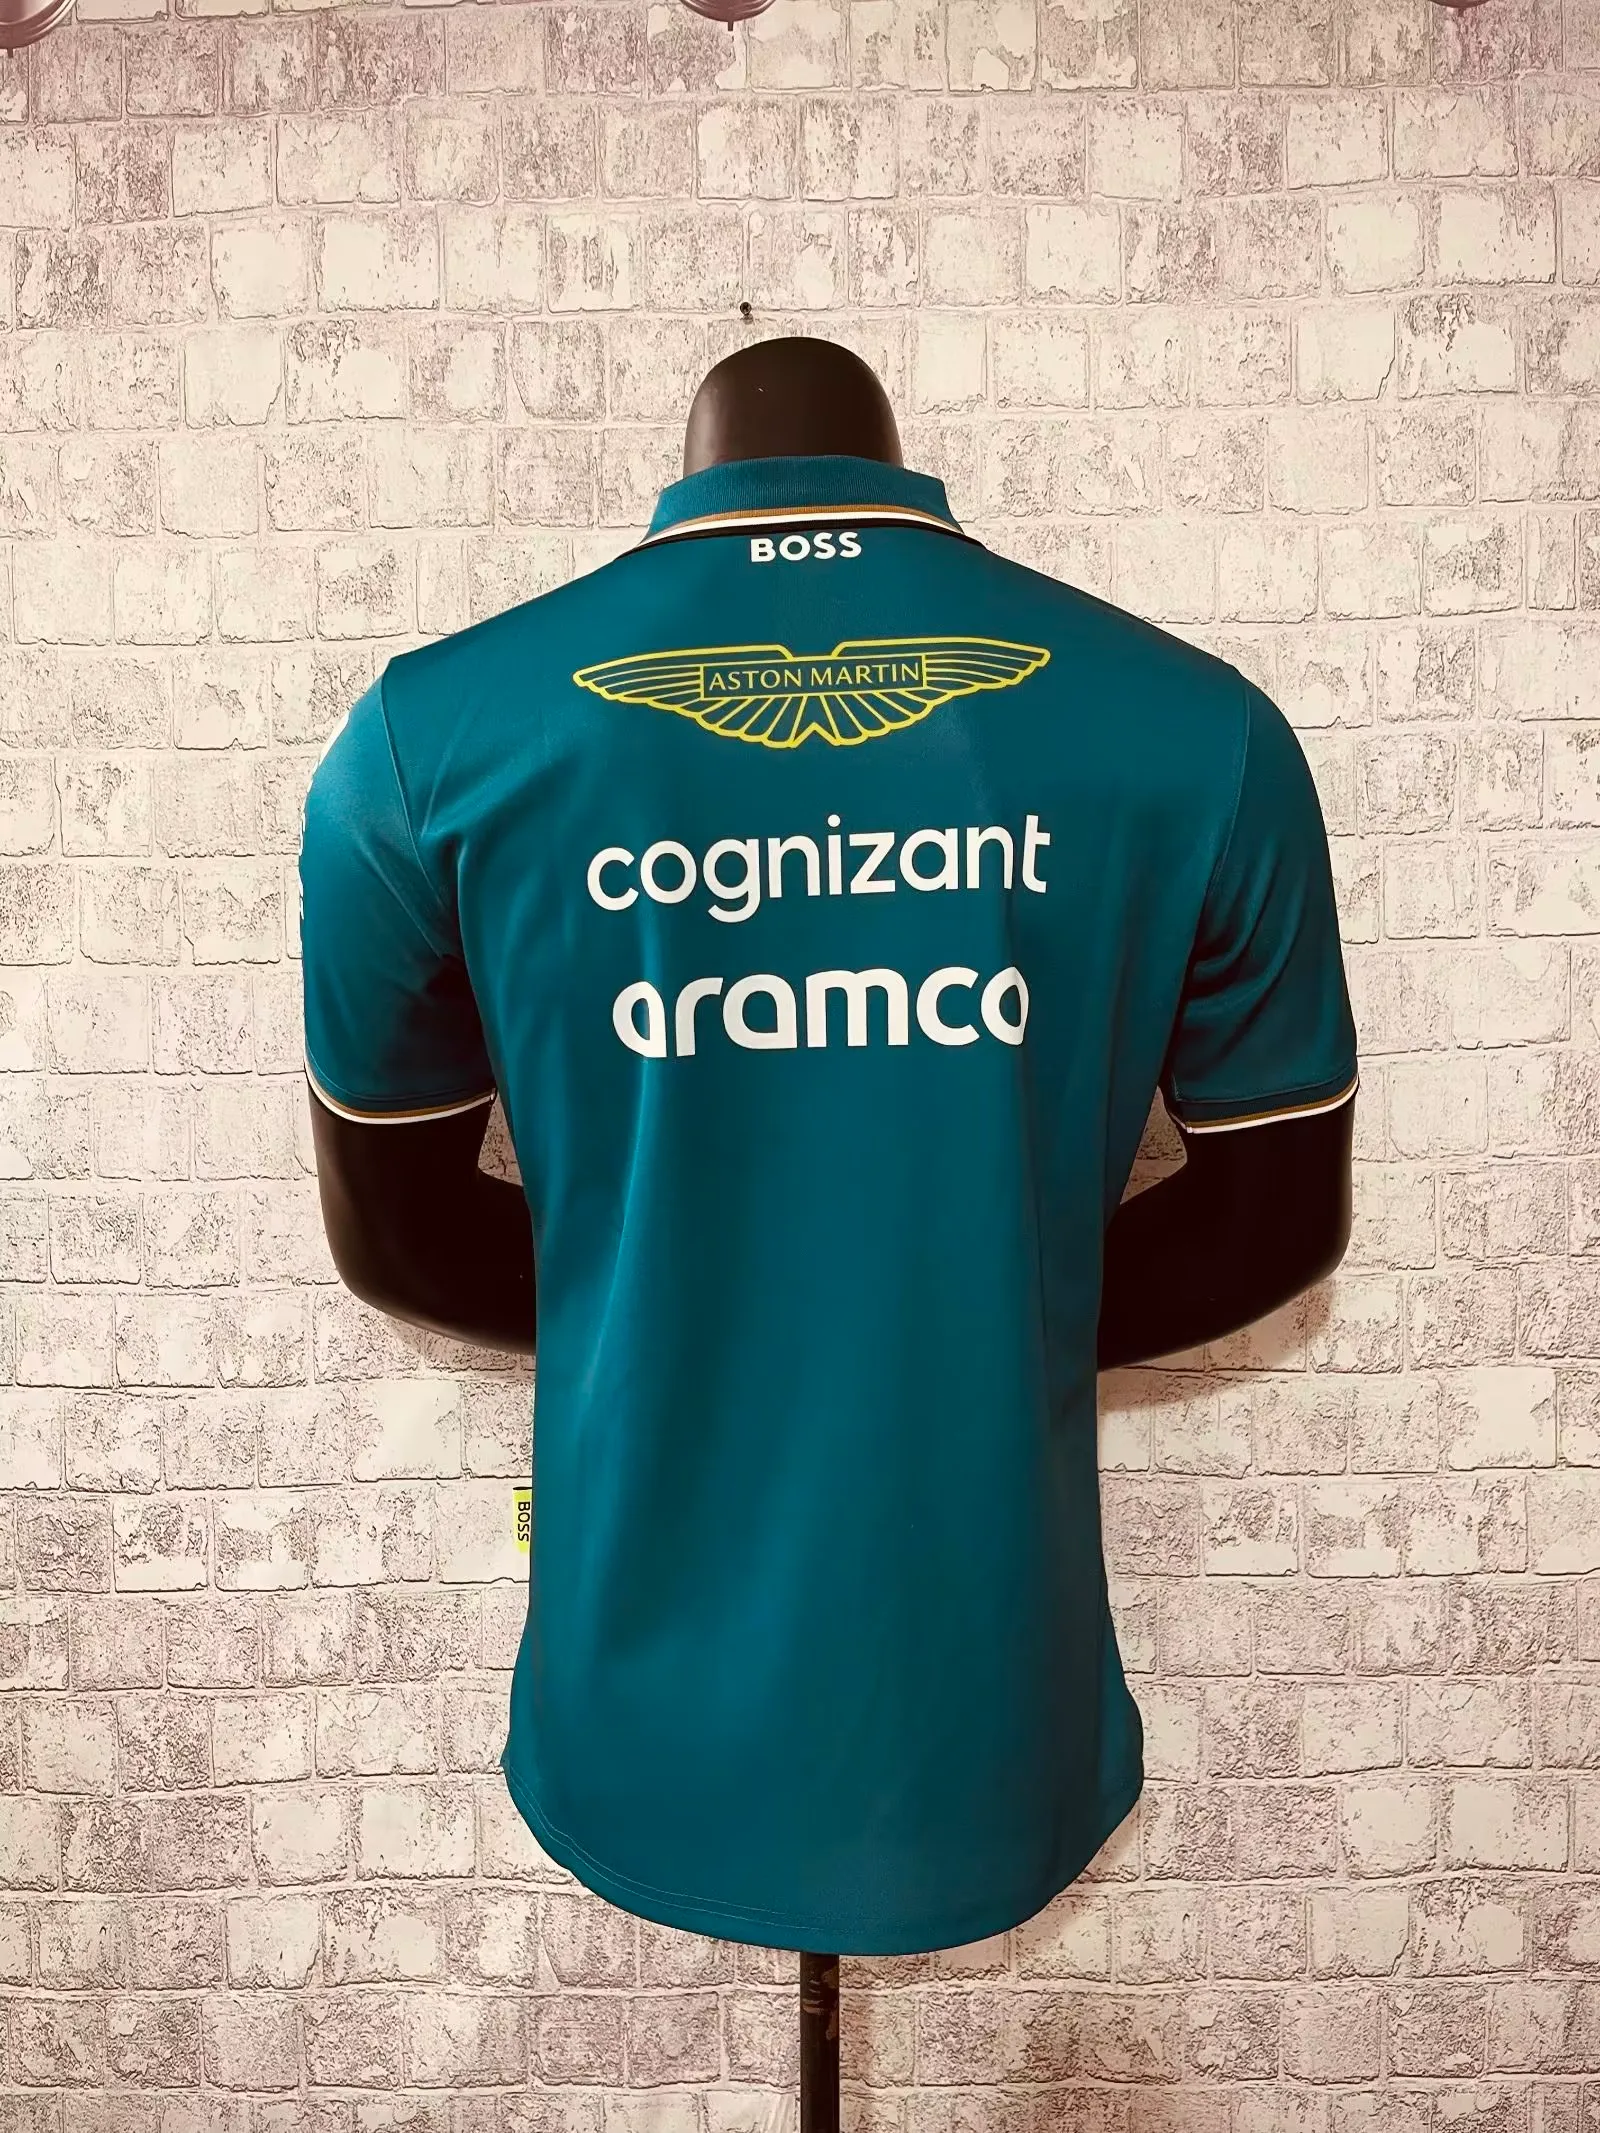 Sport Car Fans Mens Polos Aston Martin Aramco Cognizant F1 2023 Official  Team Polo Vettel Stroll Driver T Shirt Size From Brandshop86, $17.09